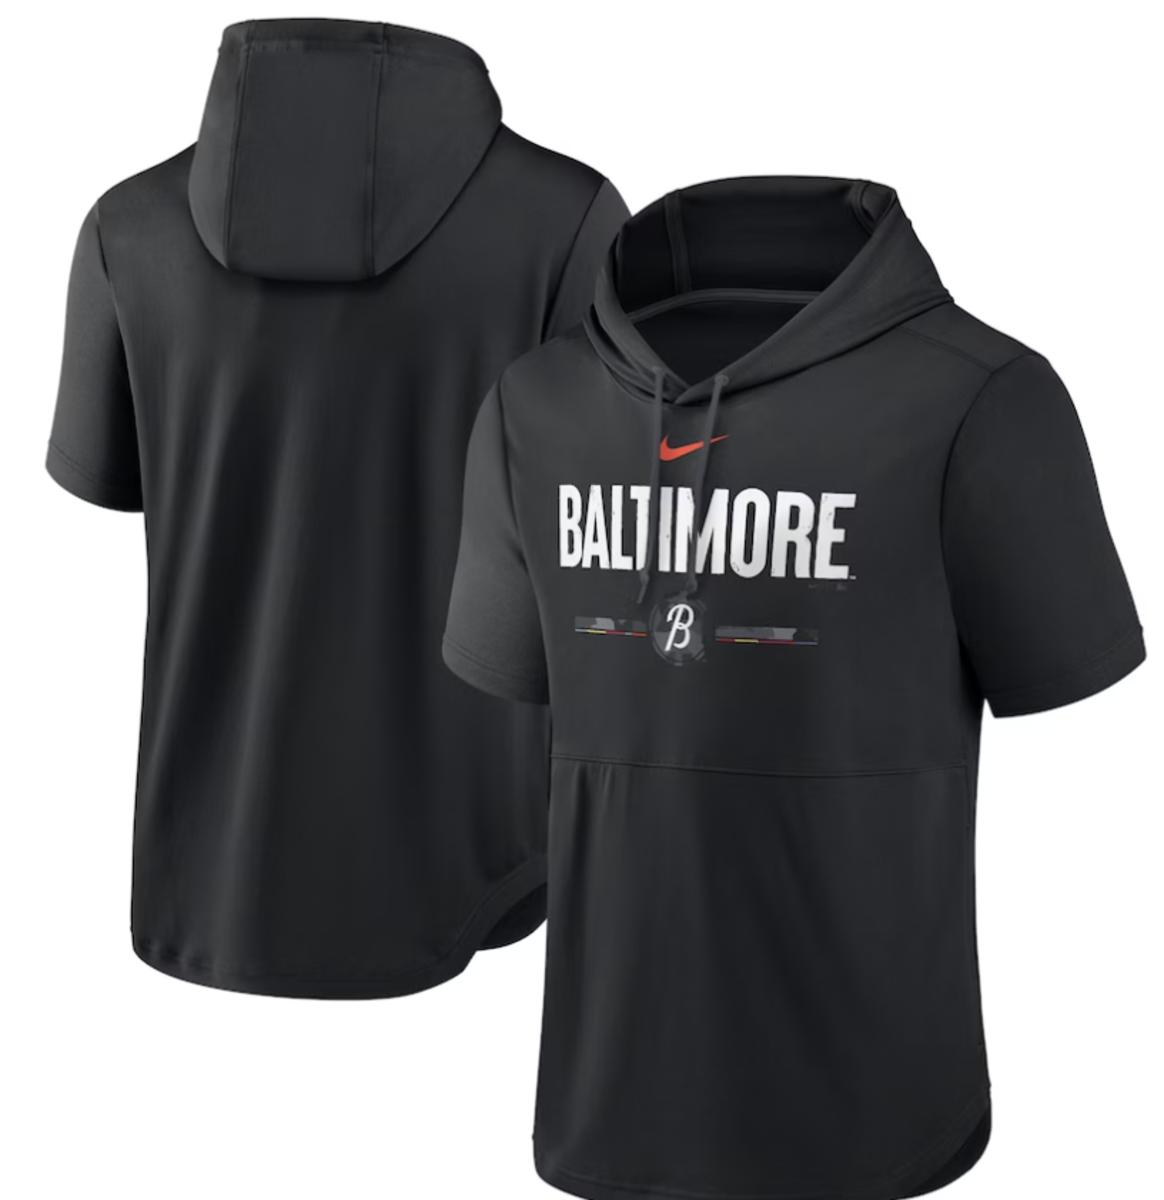 Baltimore Orioles City Connect Collection, how to buy your City Connect  Orioles gear - FanNation